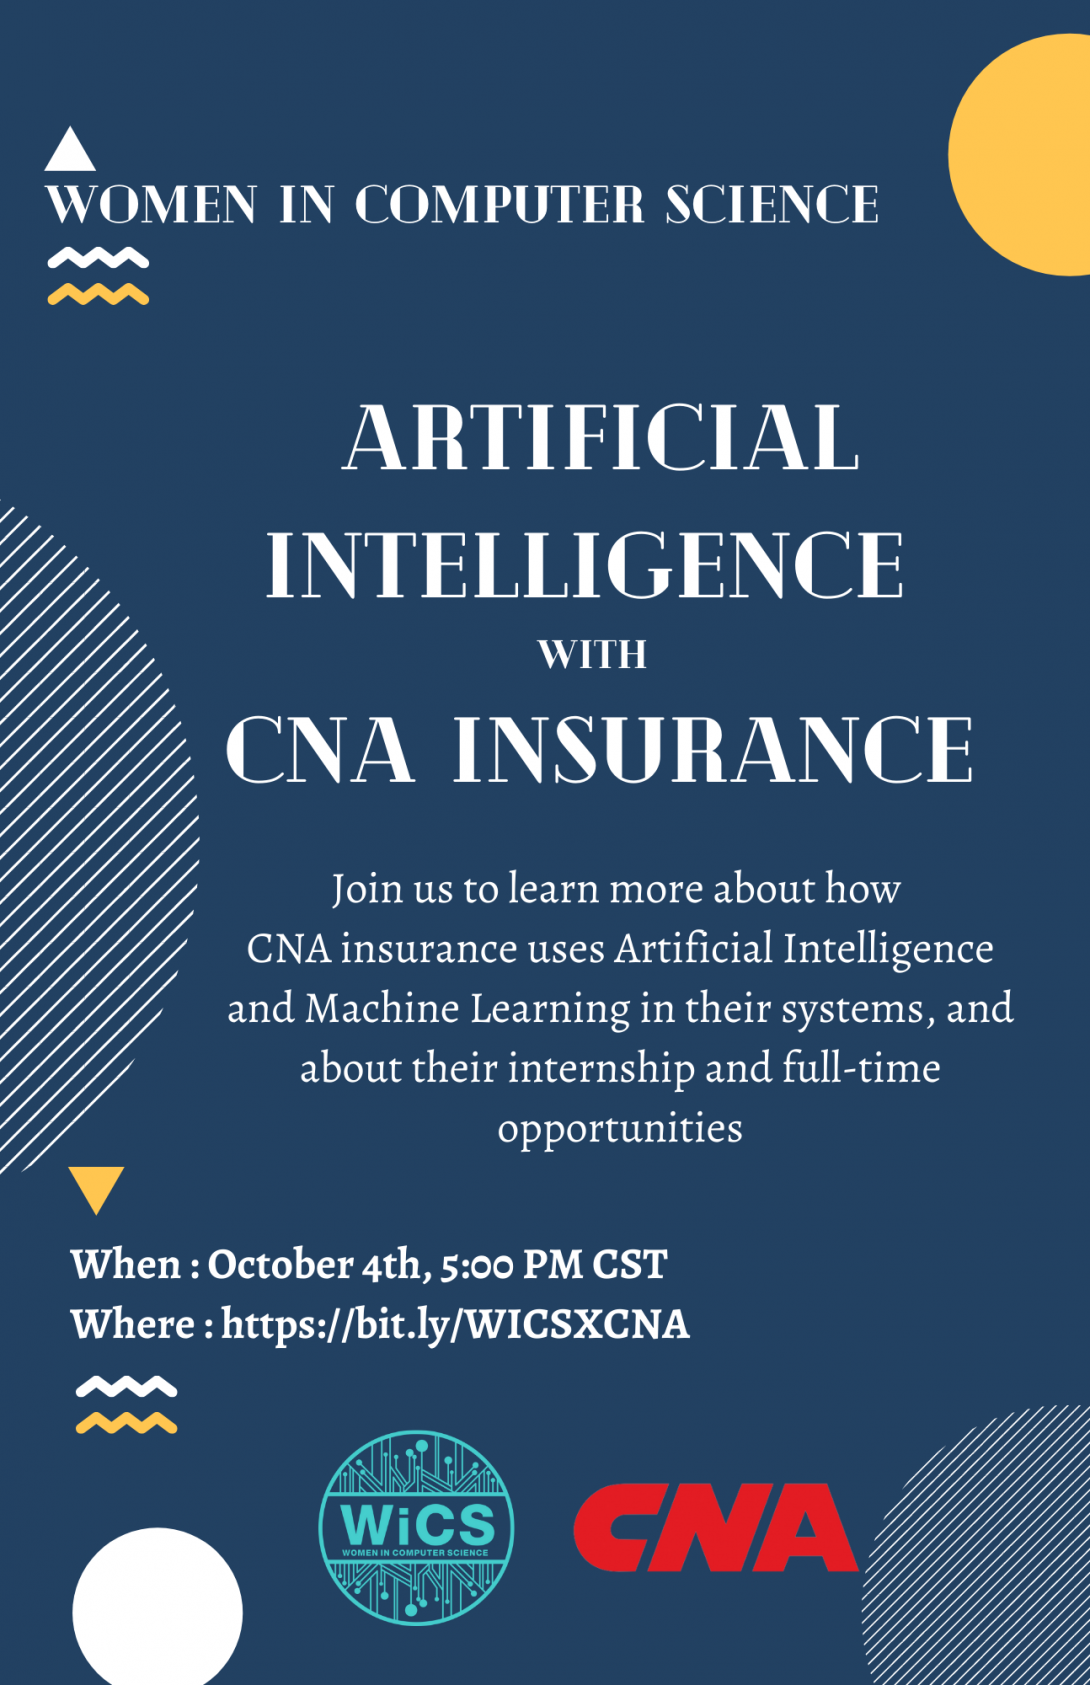 WiCS hosts CNA Insurance and Artificial Intelligence: Join us to learn about how CNA uses Artificial Intelligence and Machine Learning in the Insurance industry. They will also go over open full-time and internship opportunities, and the application process.